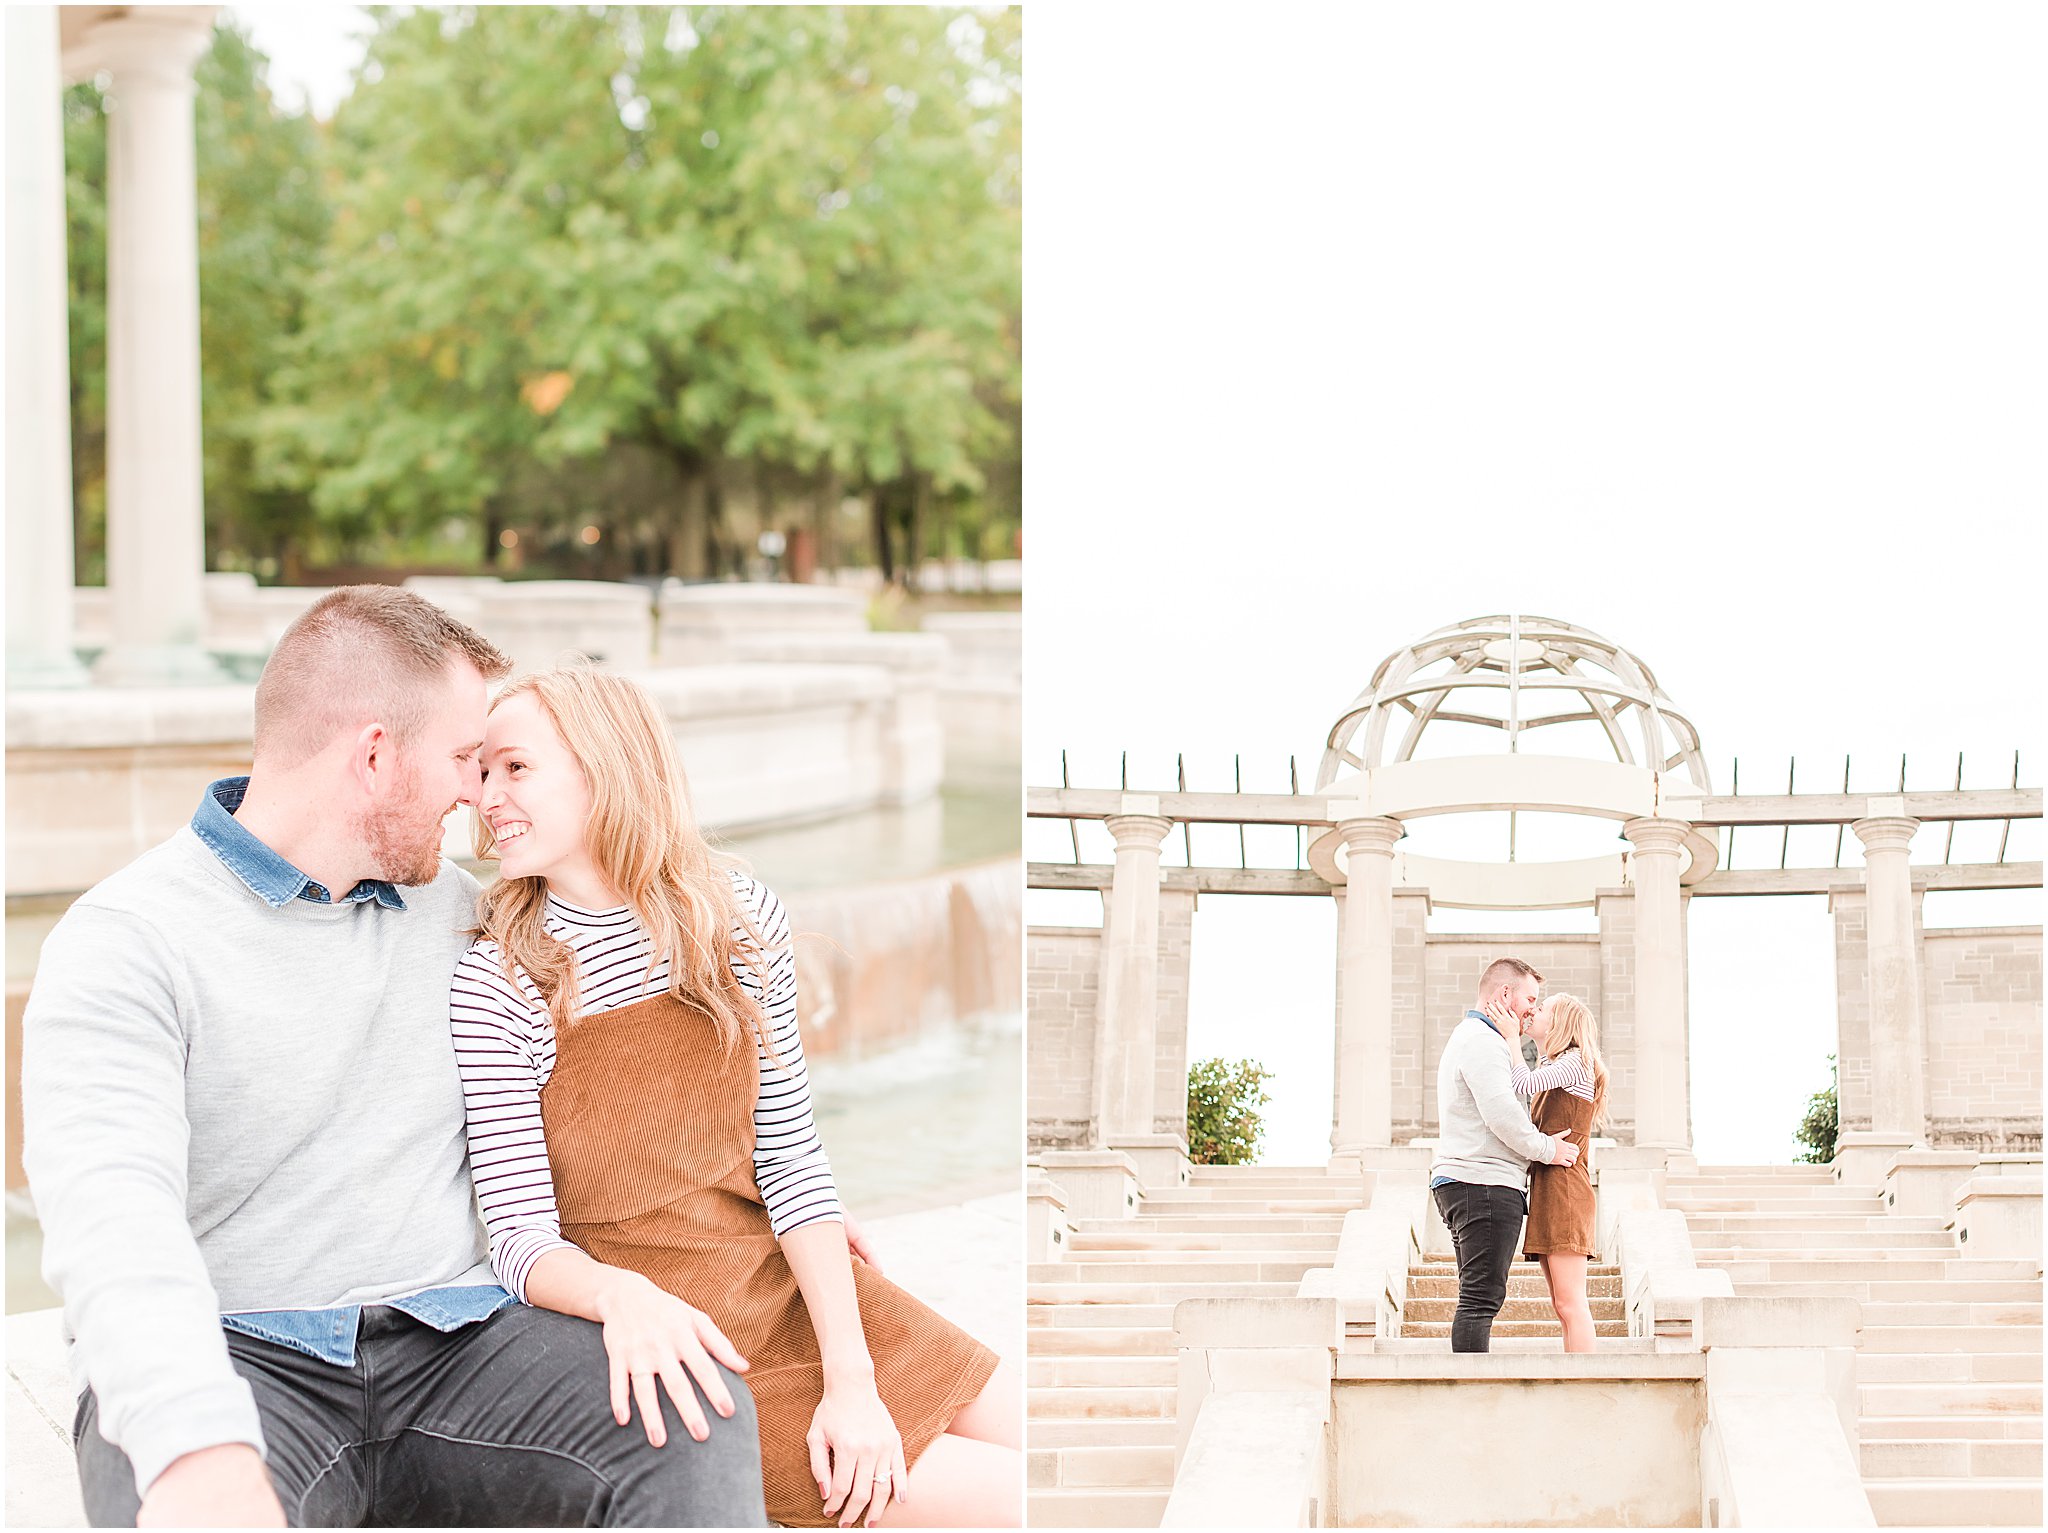 Couple smiling nose to nose during Coxhall Gardens engagement session